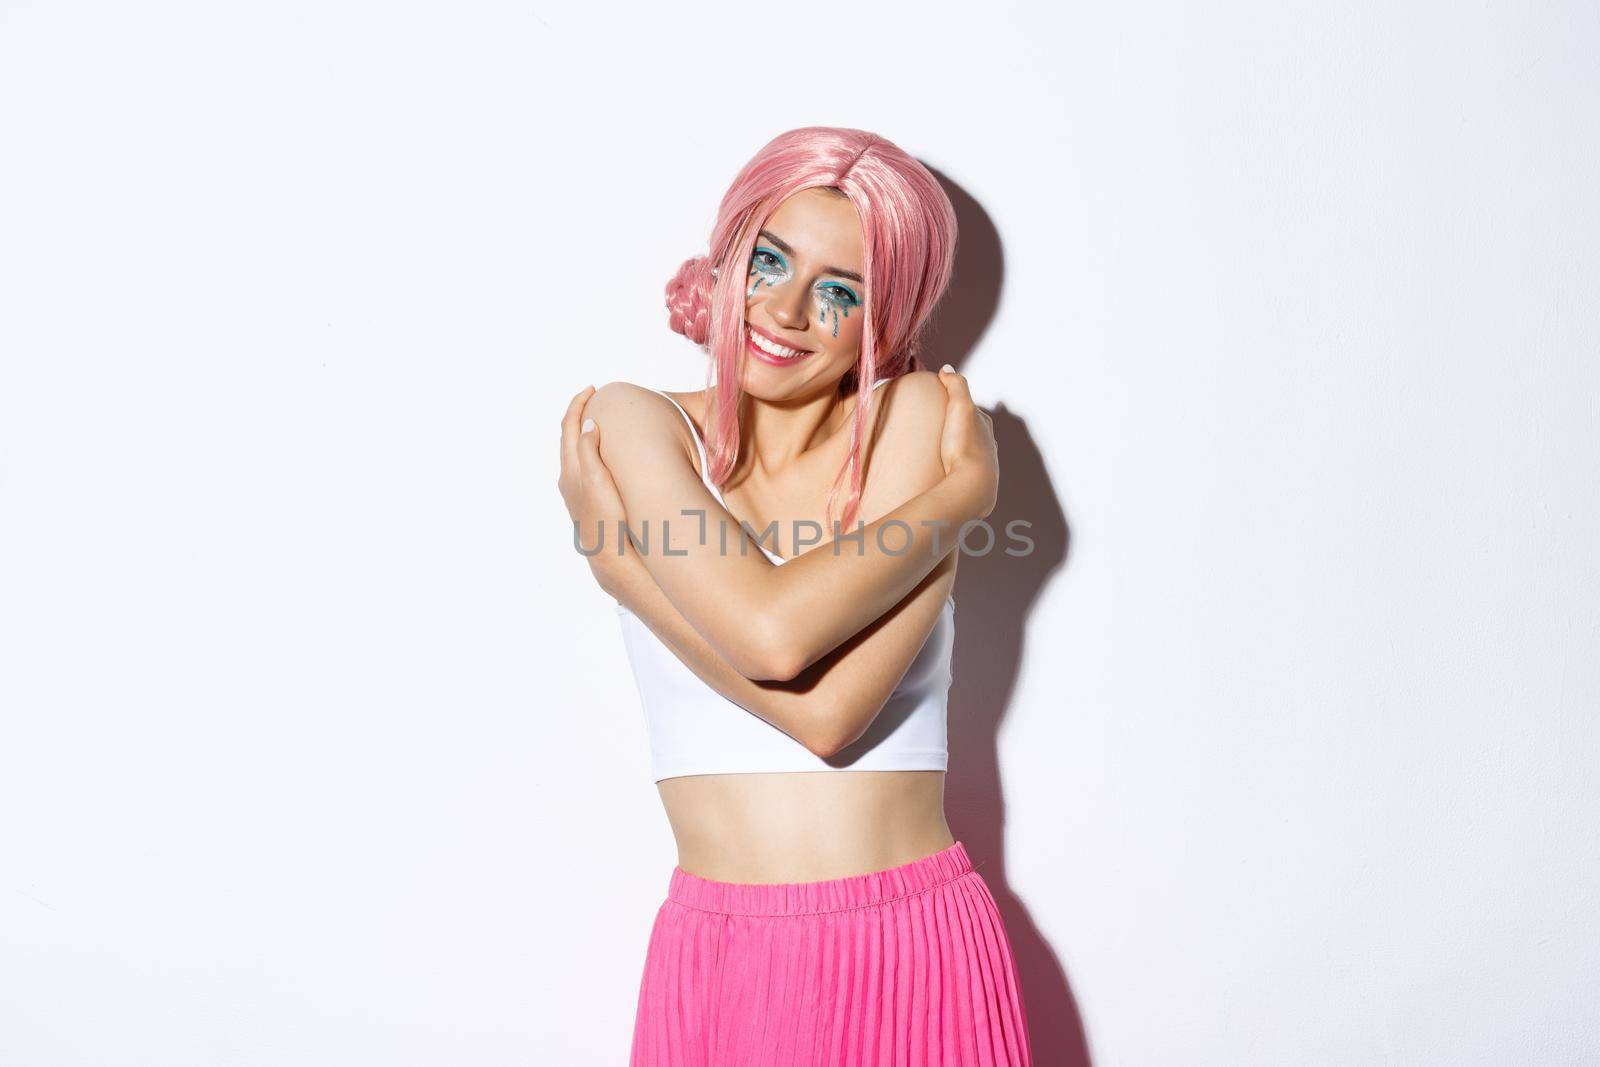 Portrait of beautiful and tender young woman celebrating halloween in glamorous outfit with pink wig, embracing her body and smiling at camera, standing over white background.